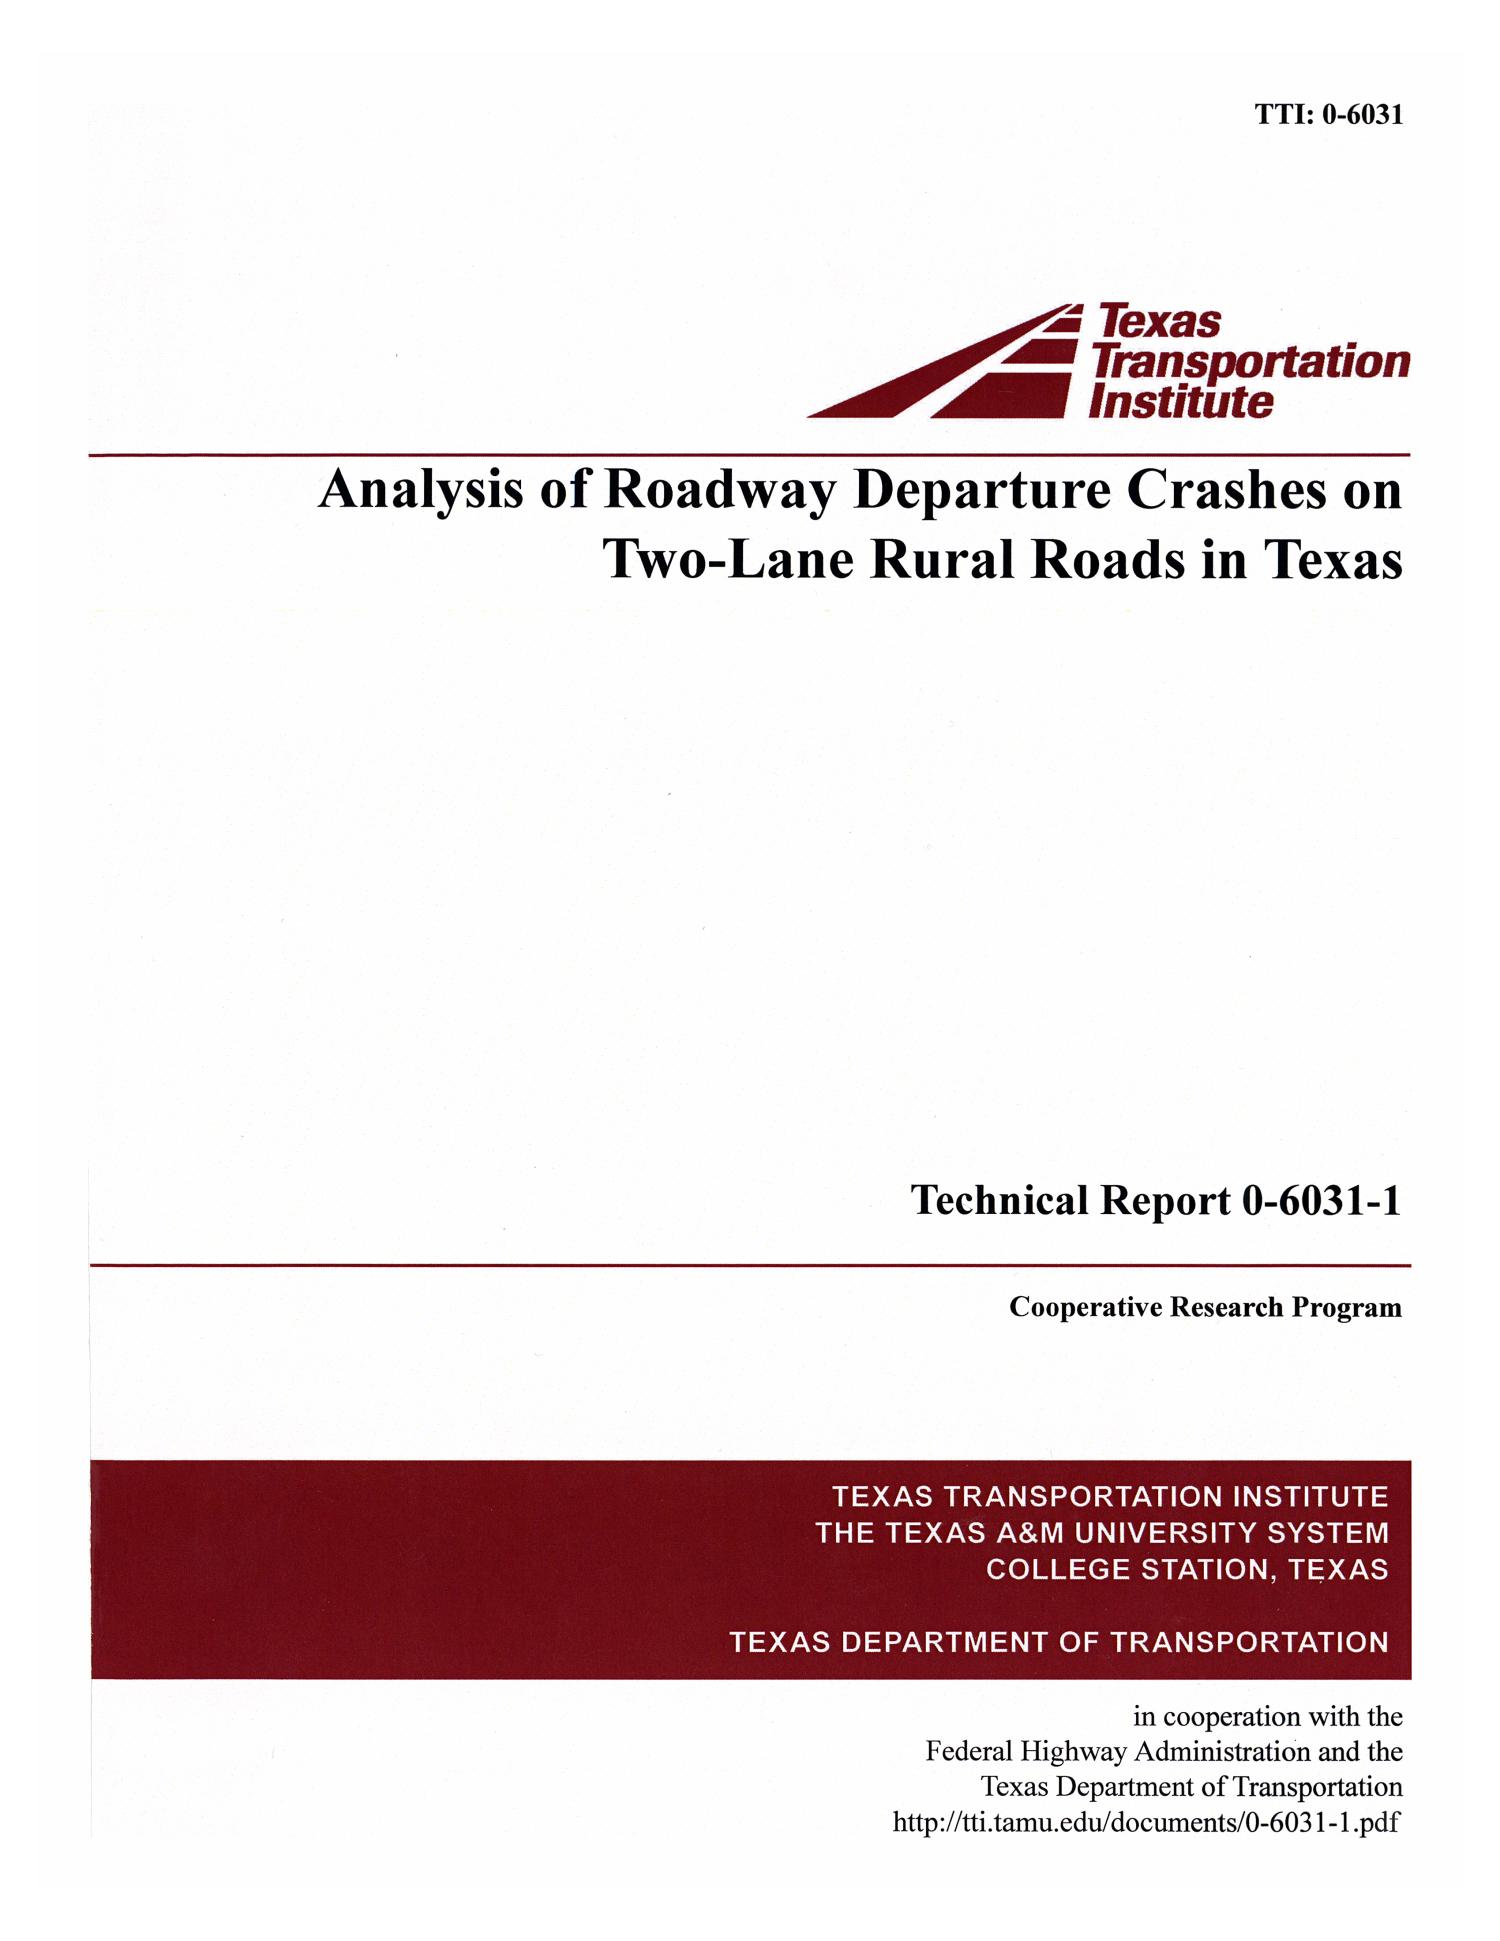 Analysis of roadway departure crashes on two-lane rural roads in Texas
                                                
                                                    Front Cover
                                                